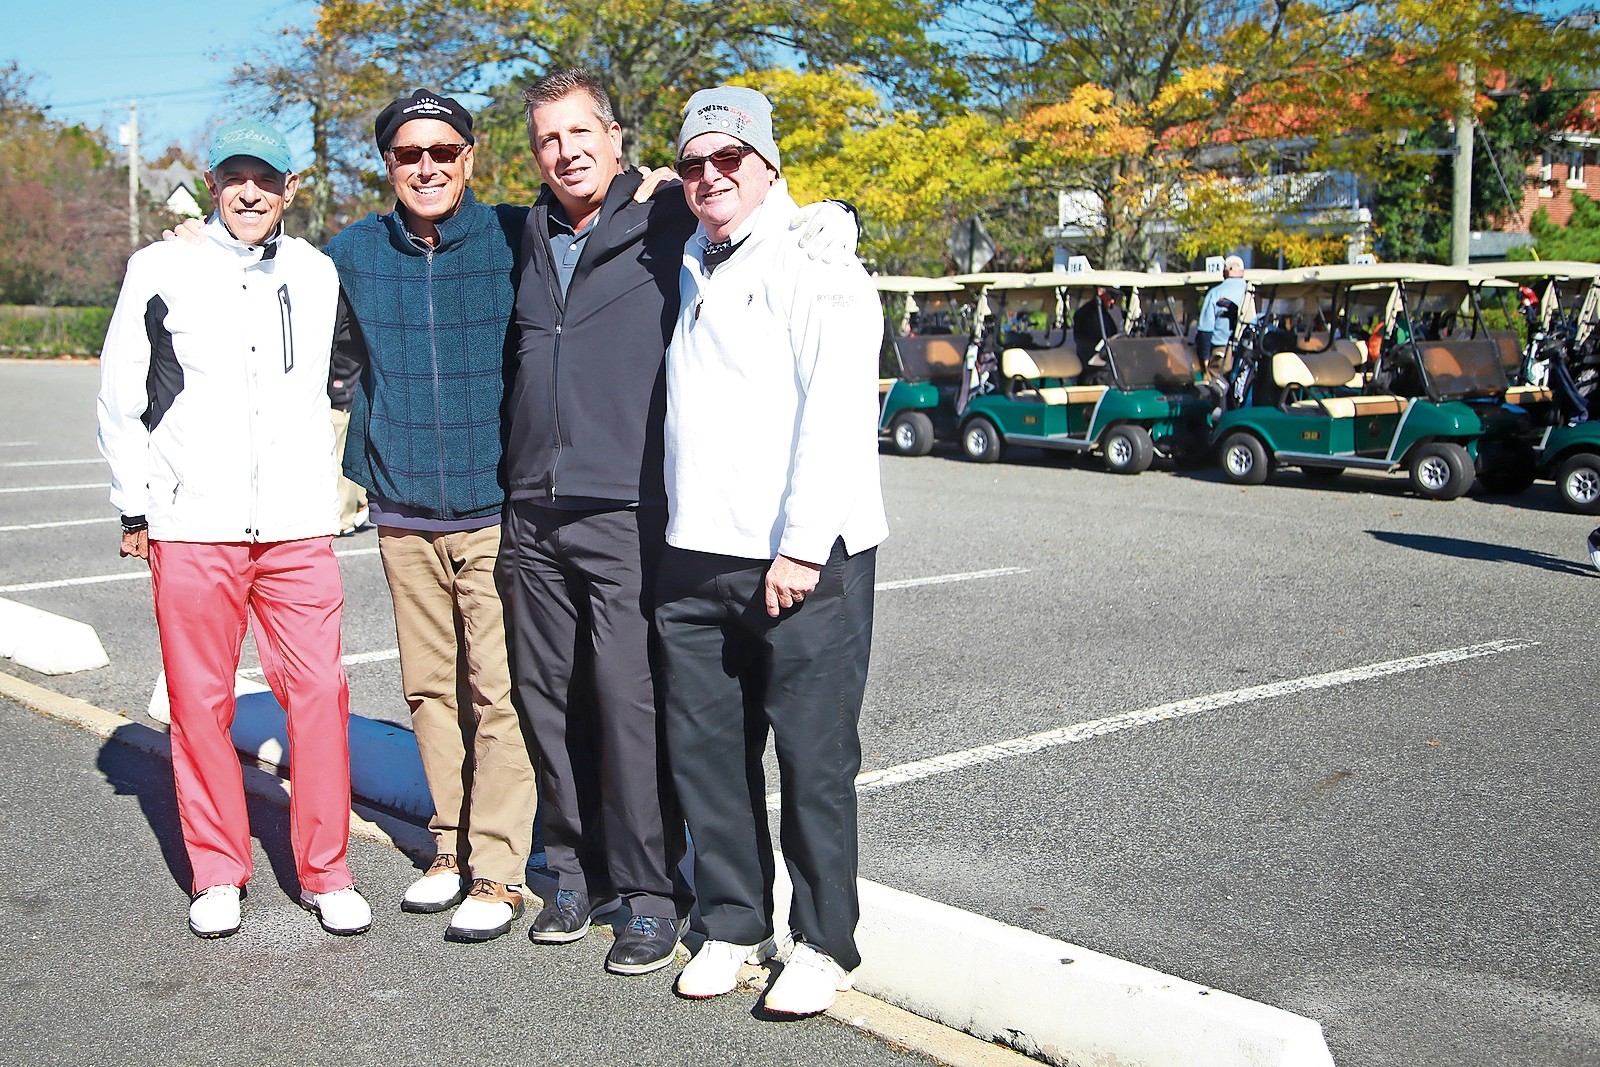 Atlantic Beach and Oceanside residents and friends, Joel Brenner, Dr. Al Rosen, a dentist, Michael Einhorn and Bill O’Brien at the Lawrence golf tournament.